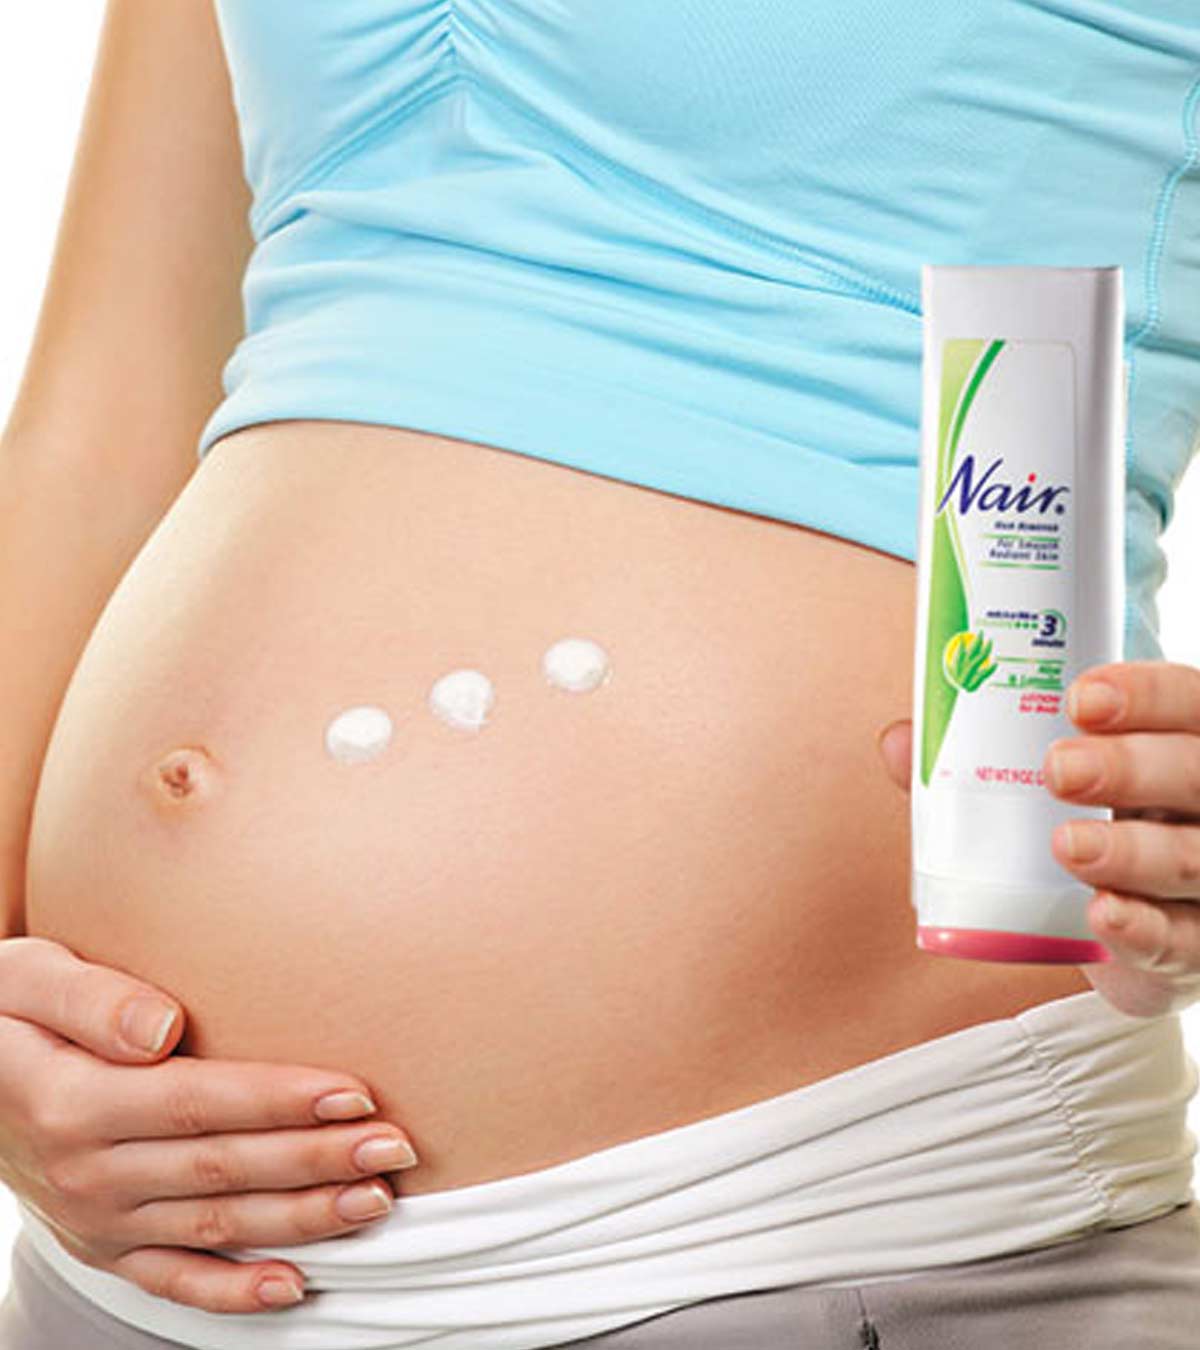 Is It Safe To Use Depilatory Cream Nair During Pregnancy?